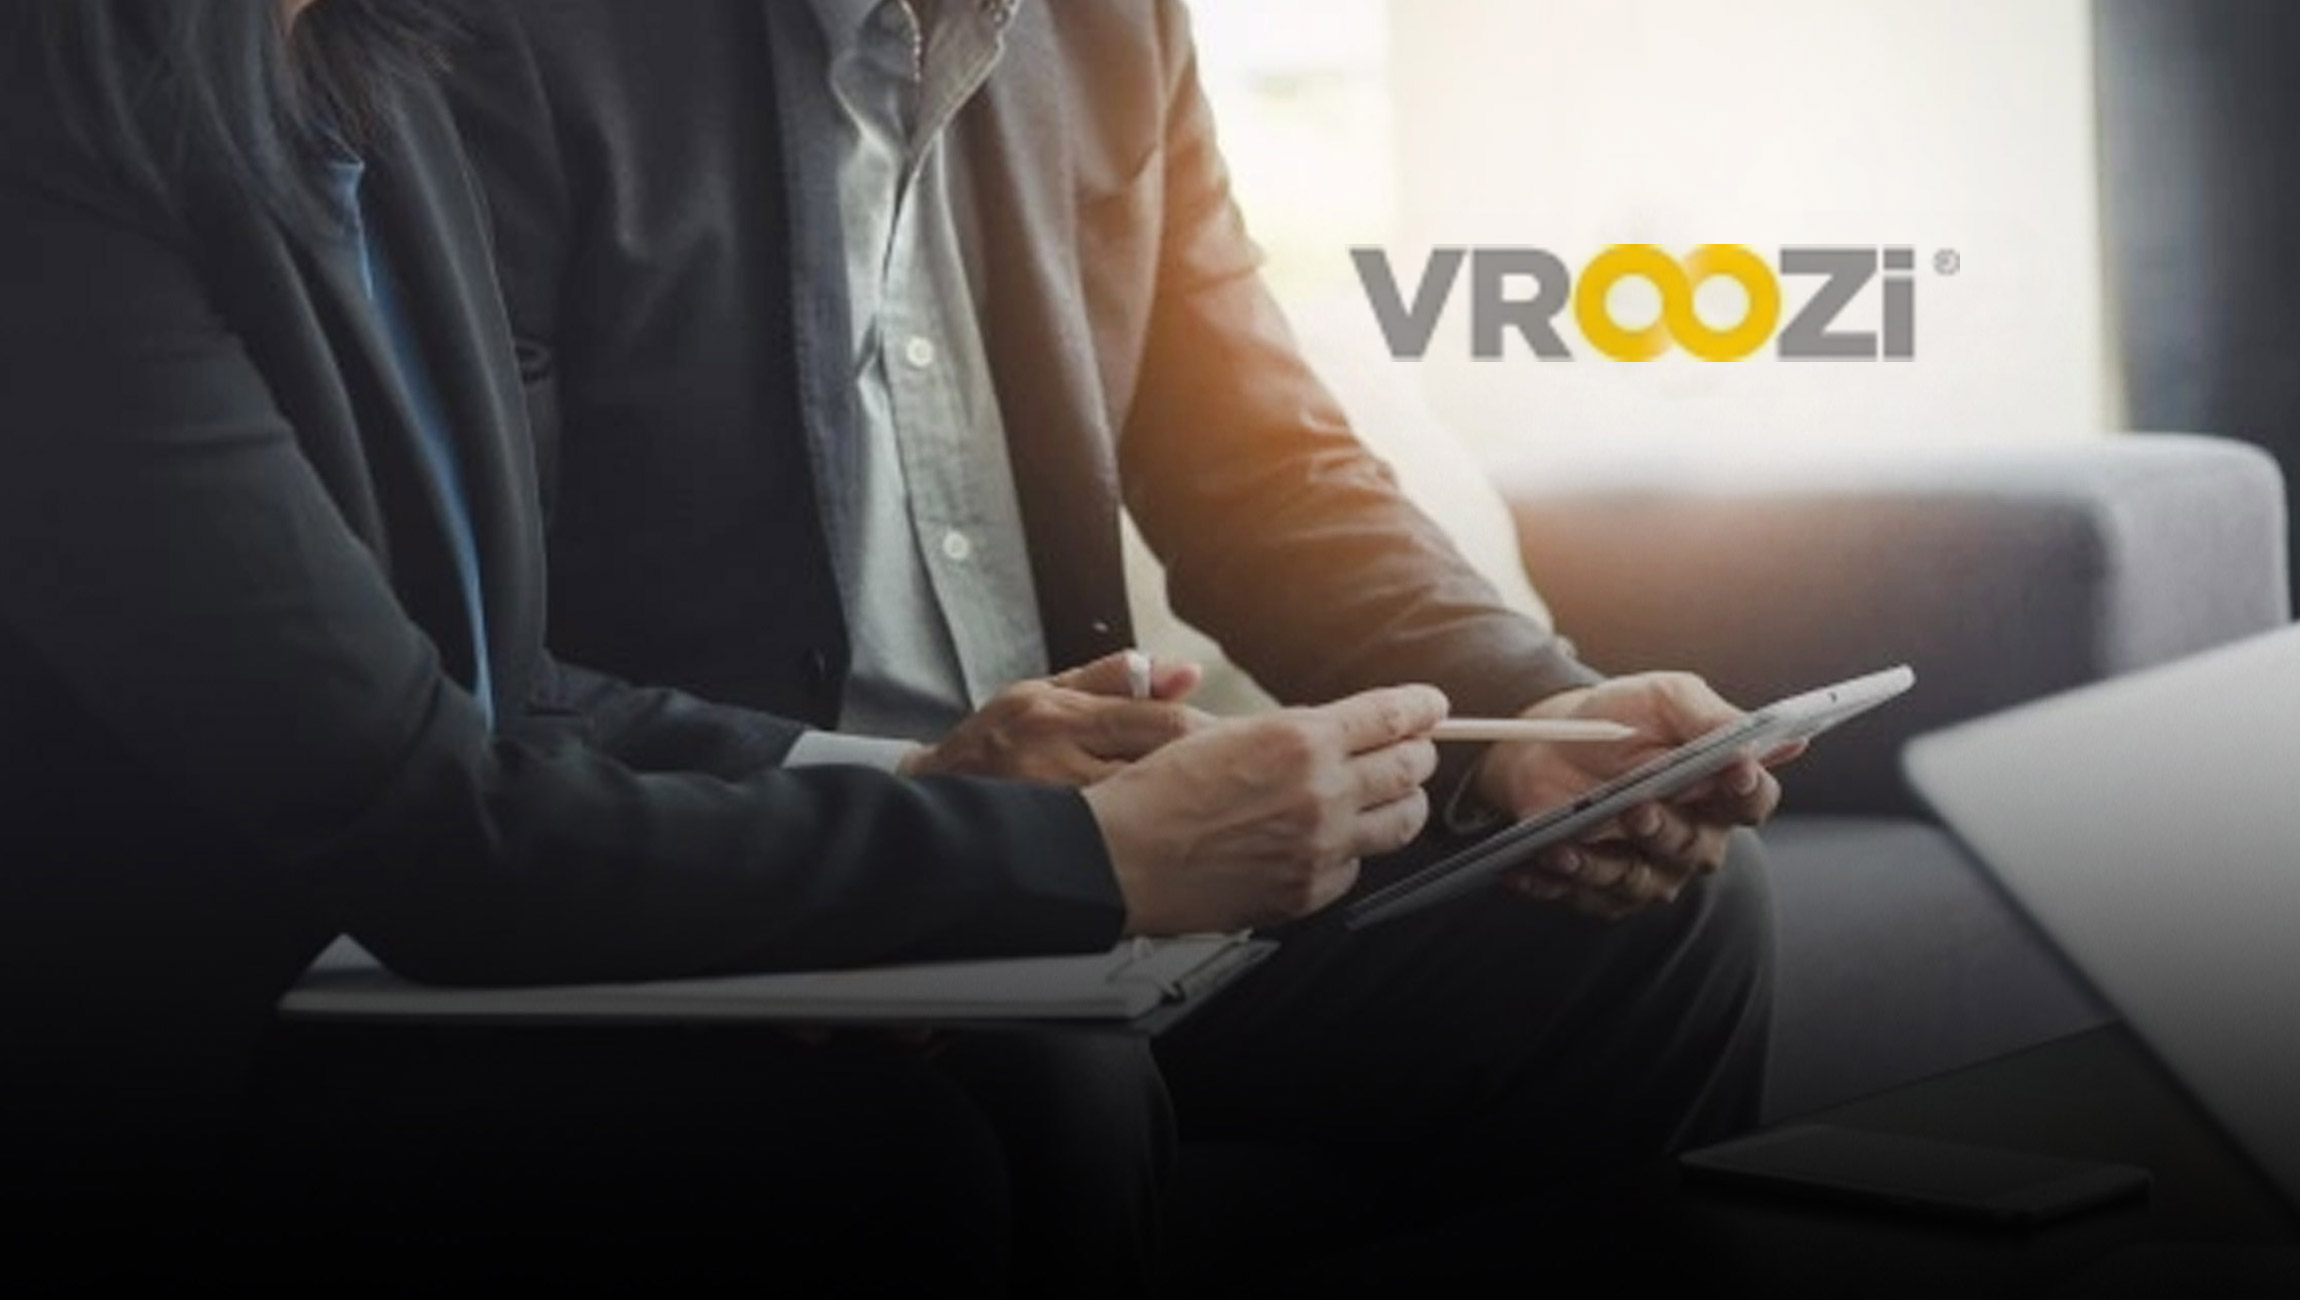 Spend Matters Recognizes Vroozi as Best-in-Class Procurement Tech Provider